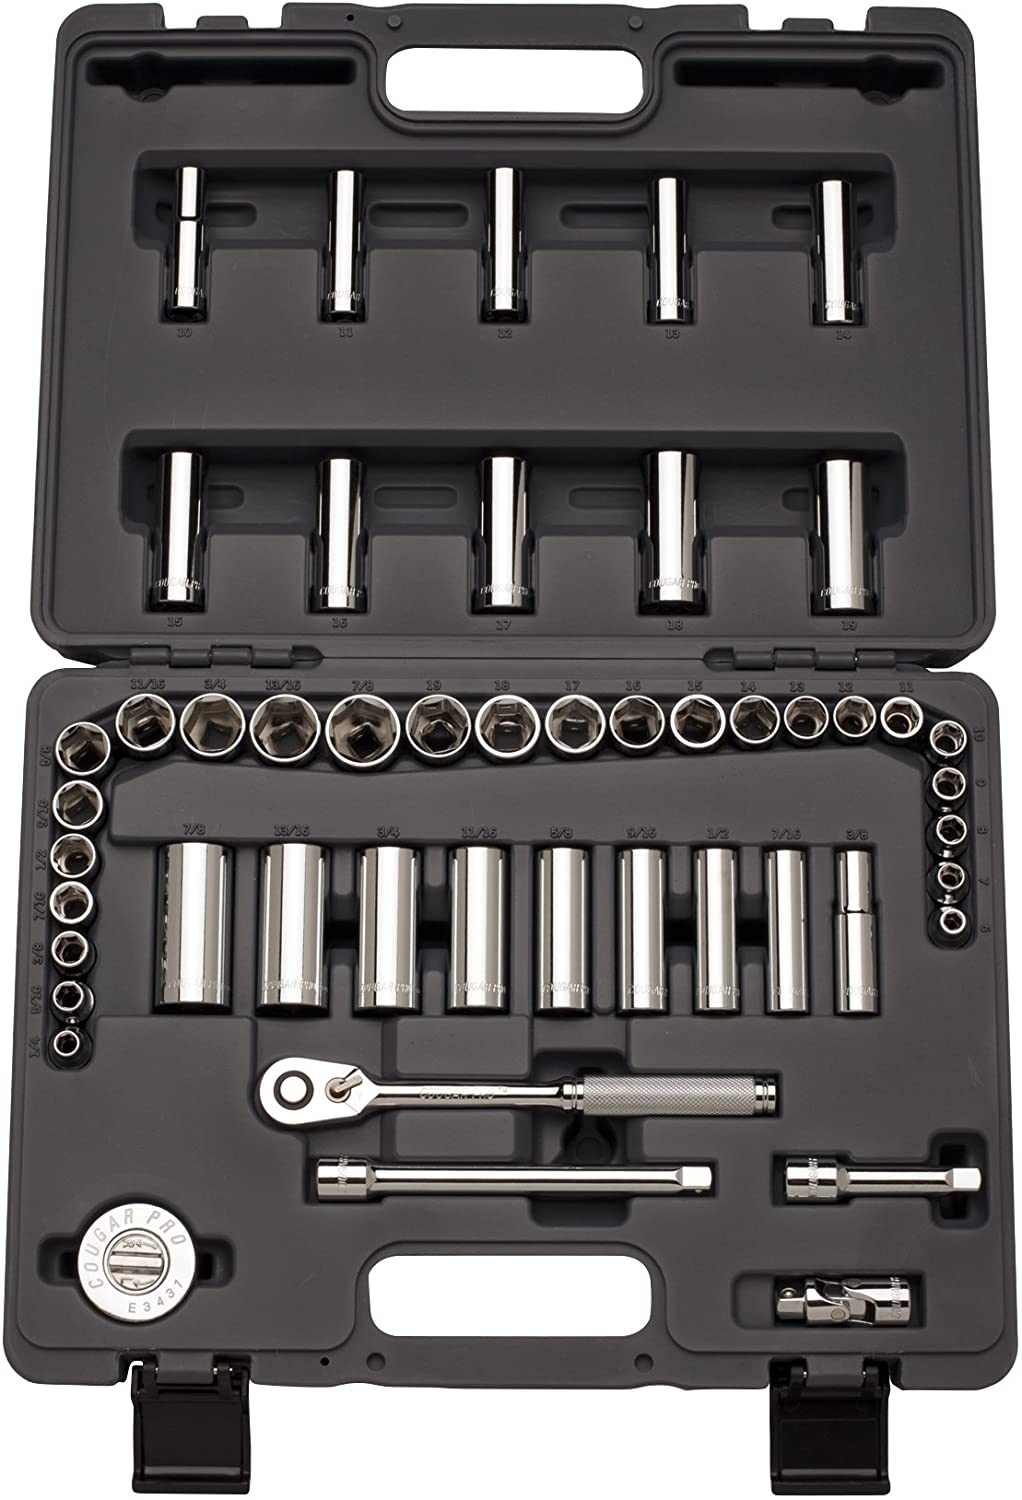 Cougar Pro by Wright Tool A49 1/2 "Drive 12 Point Standard & Deep SAE & Metric (47 Piece)